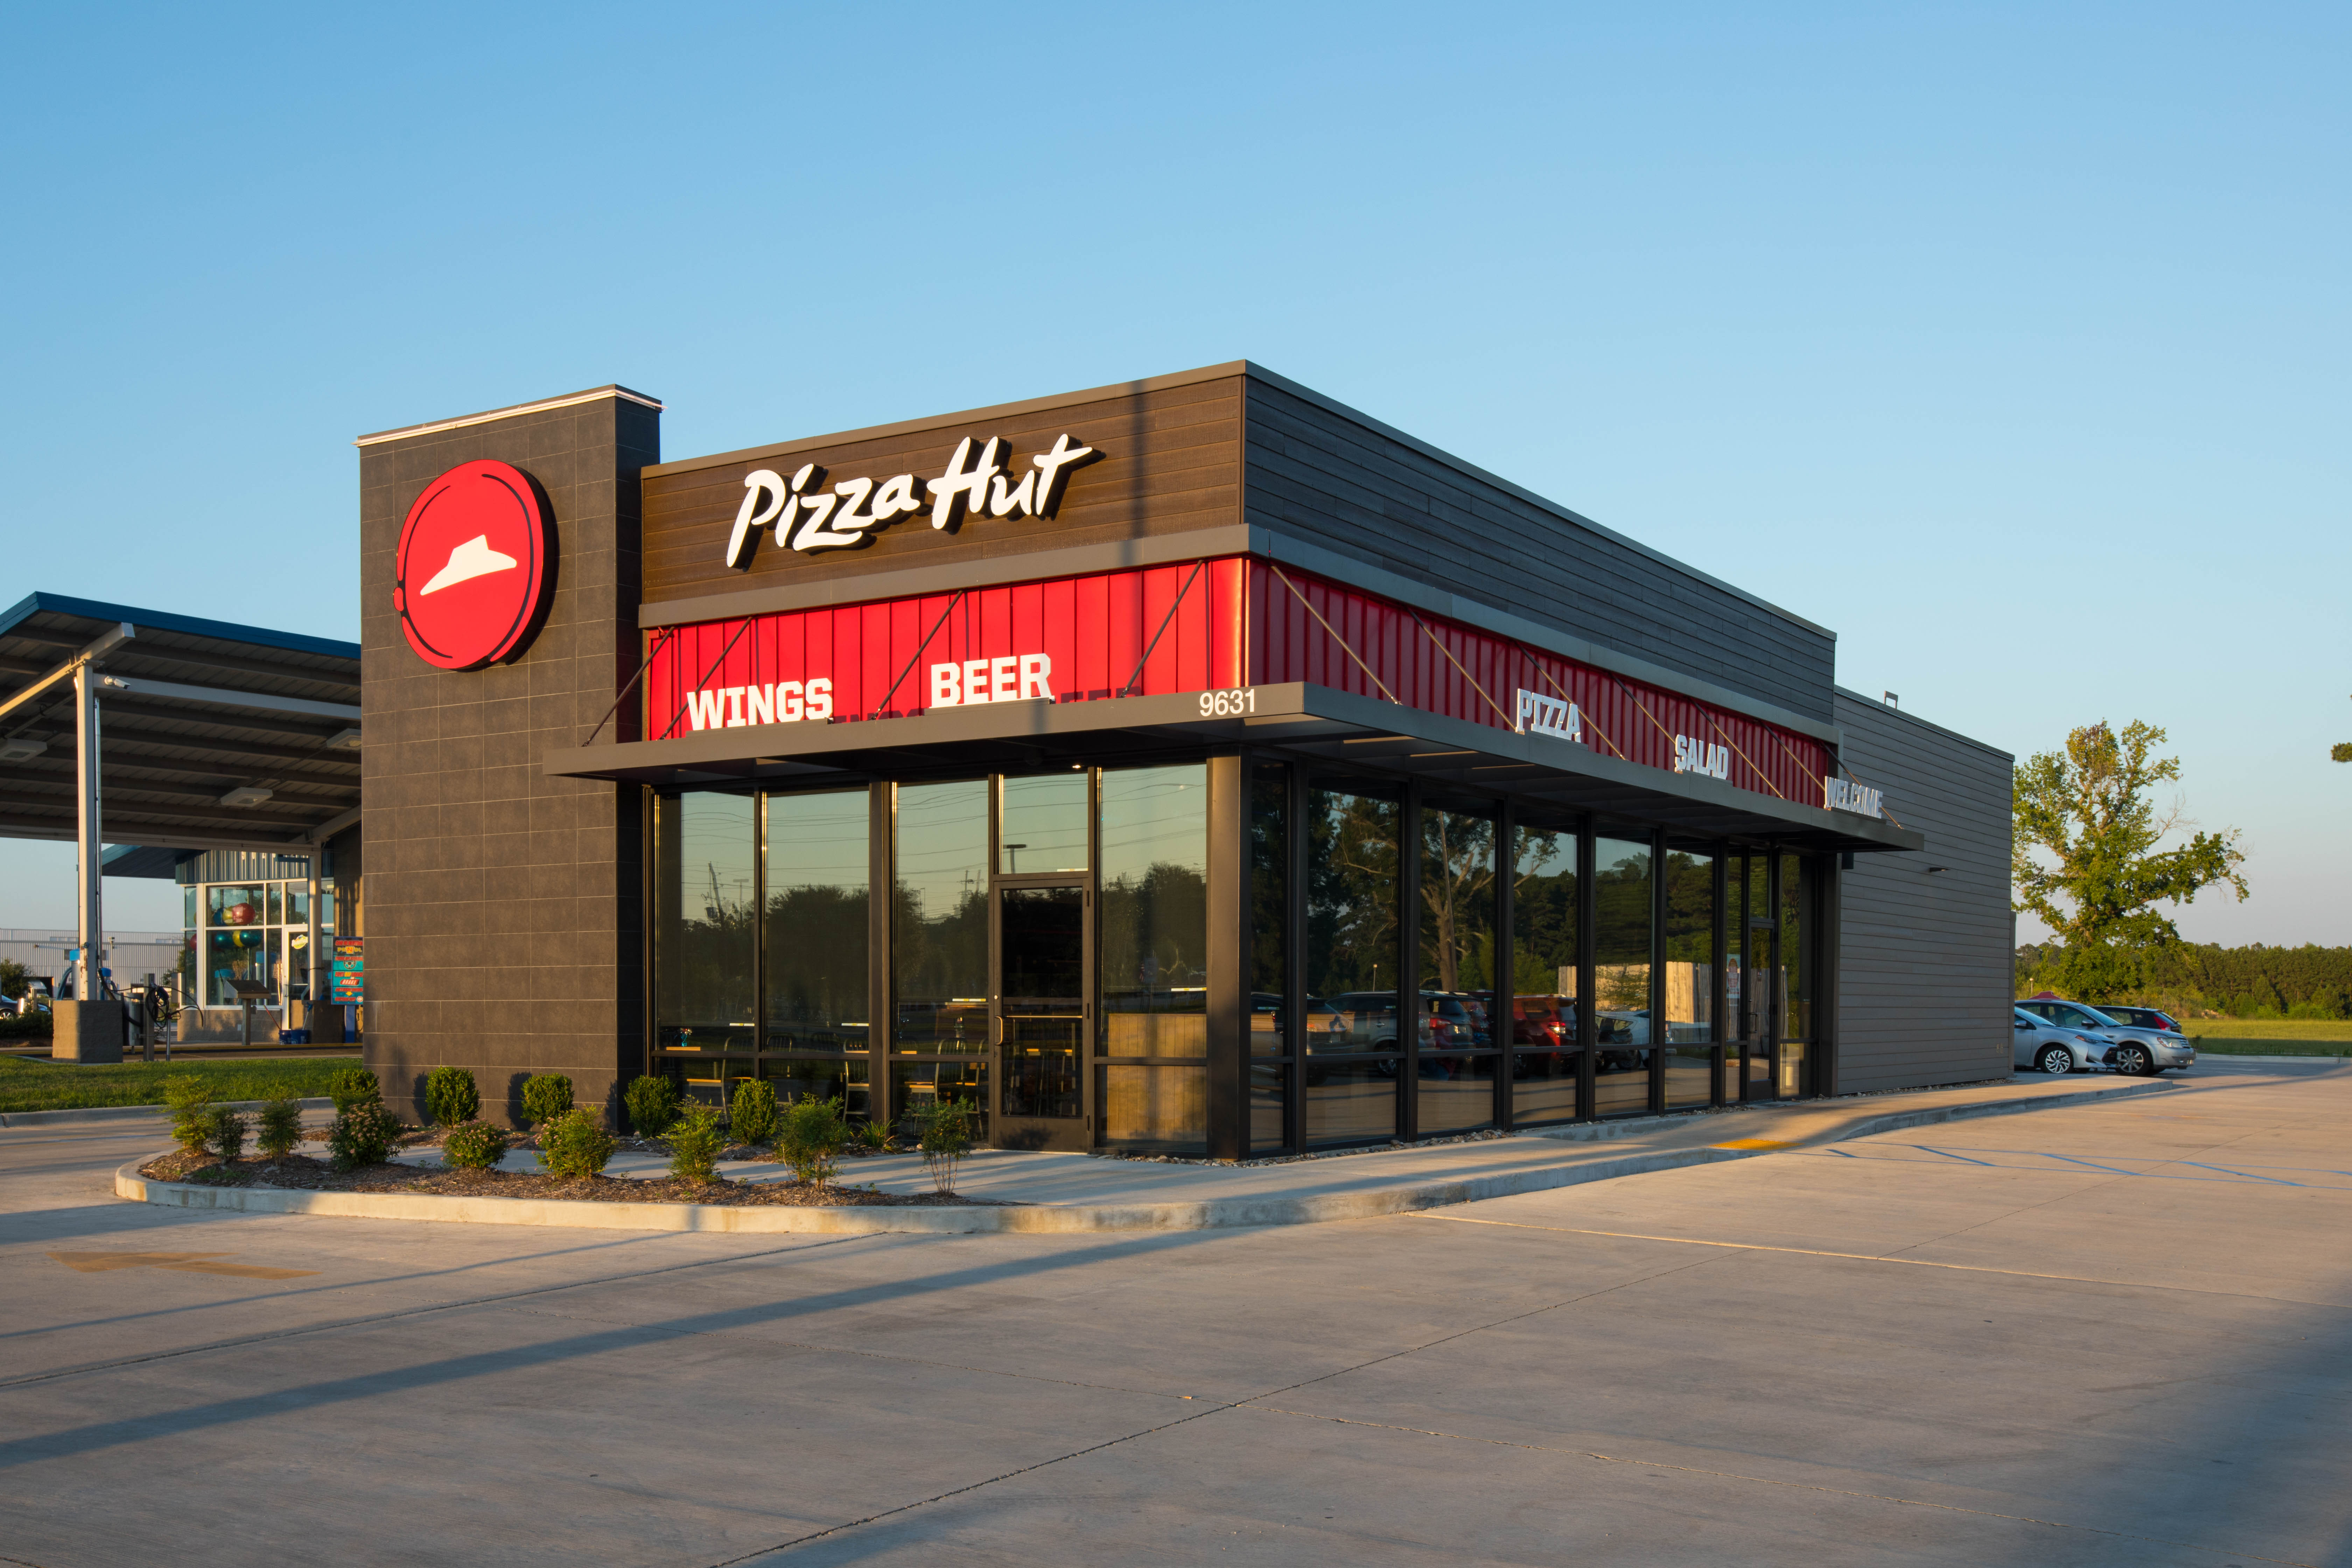 Pizza Hut Is Shutting Down Nearly 500 Restaurants In The U.S.